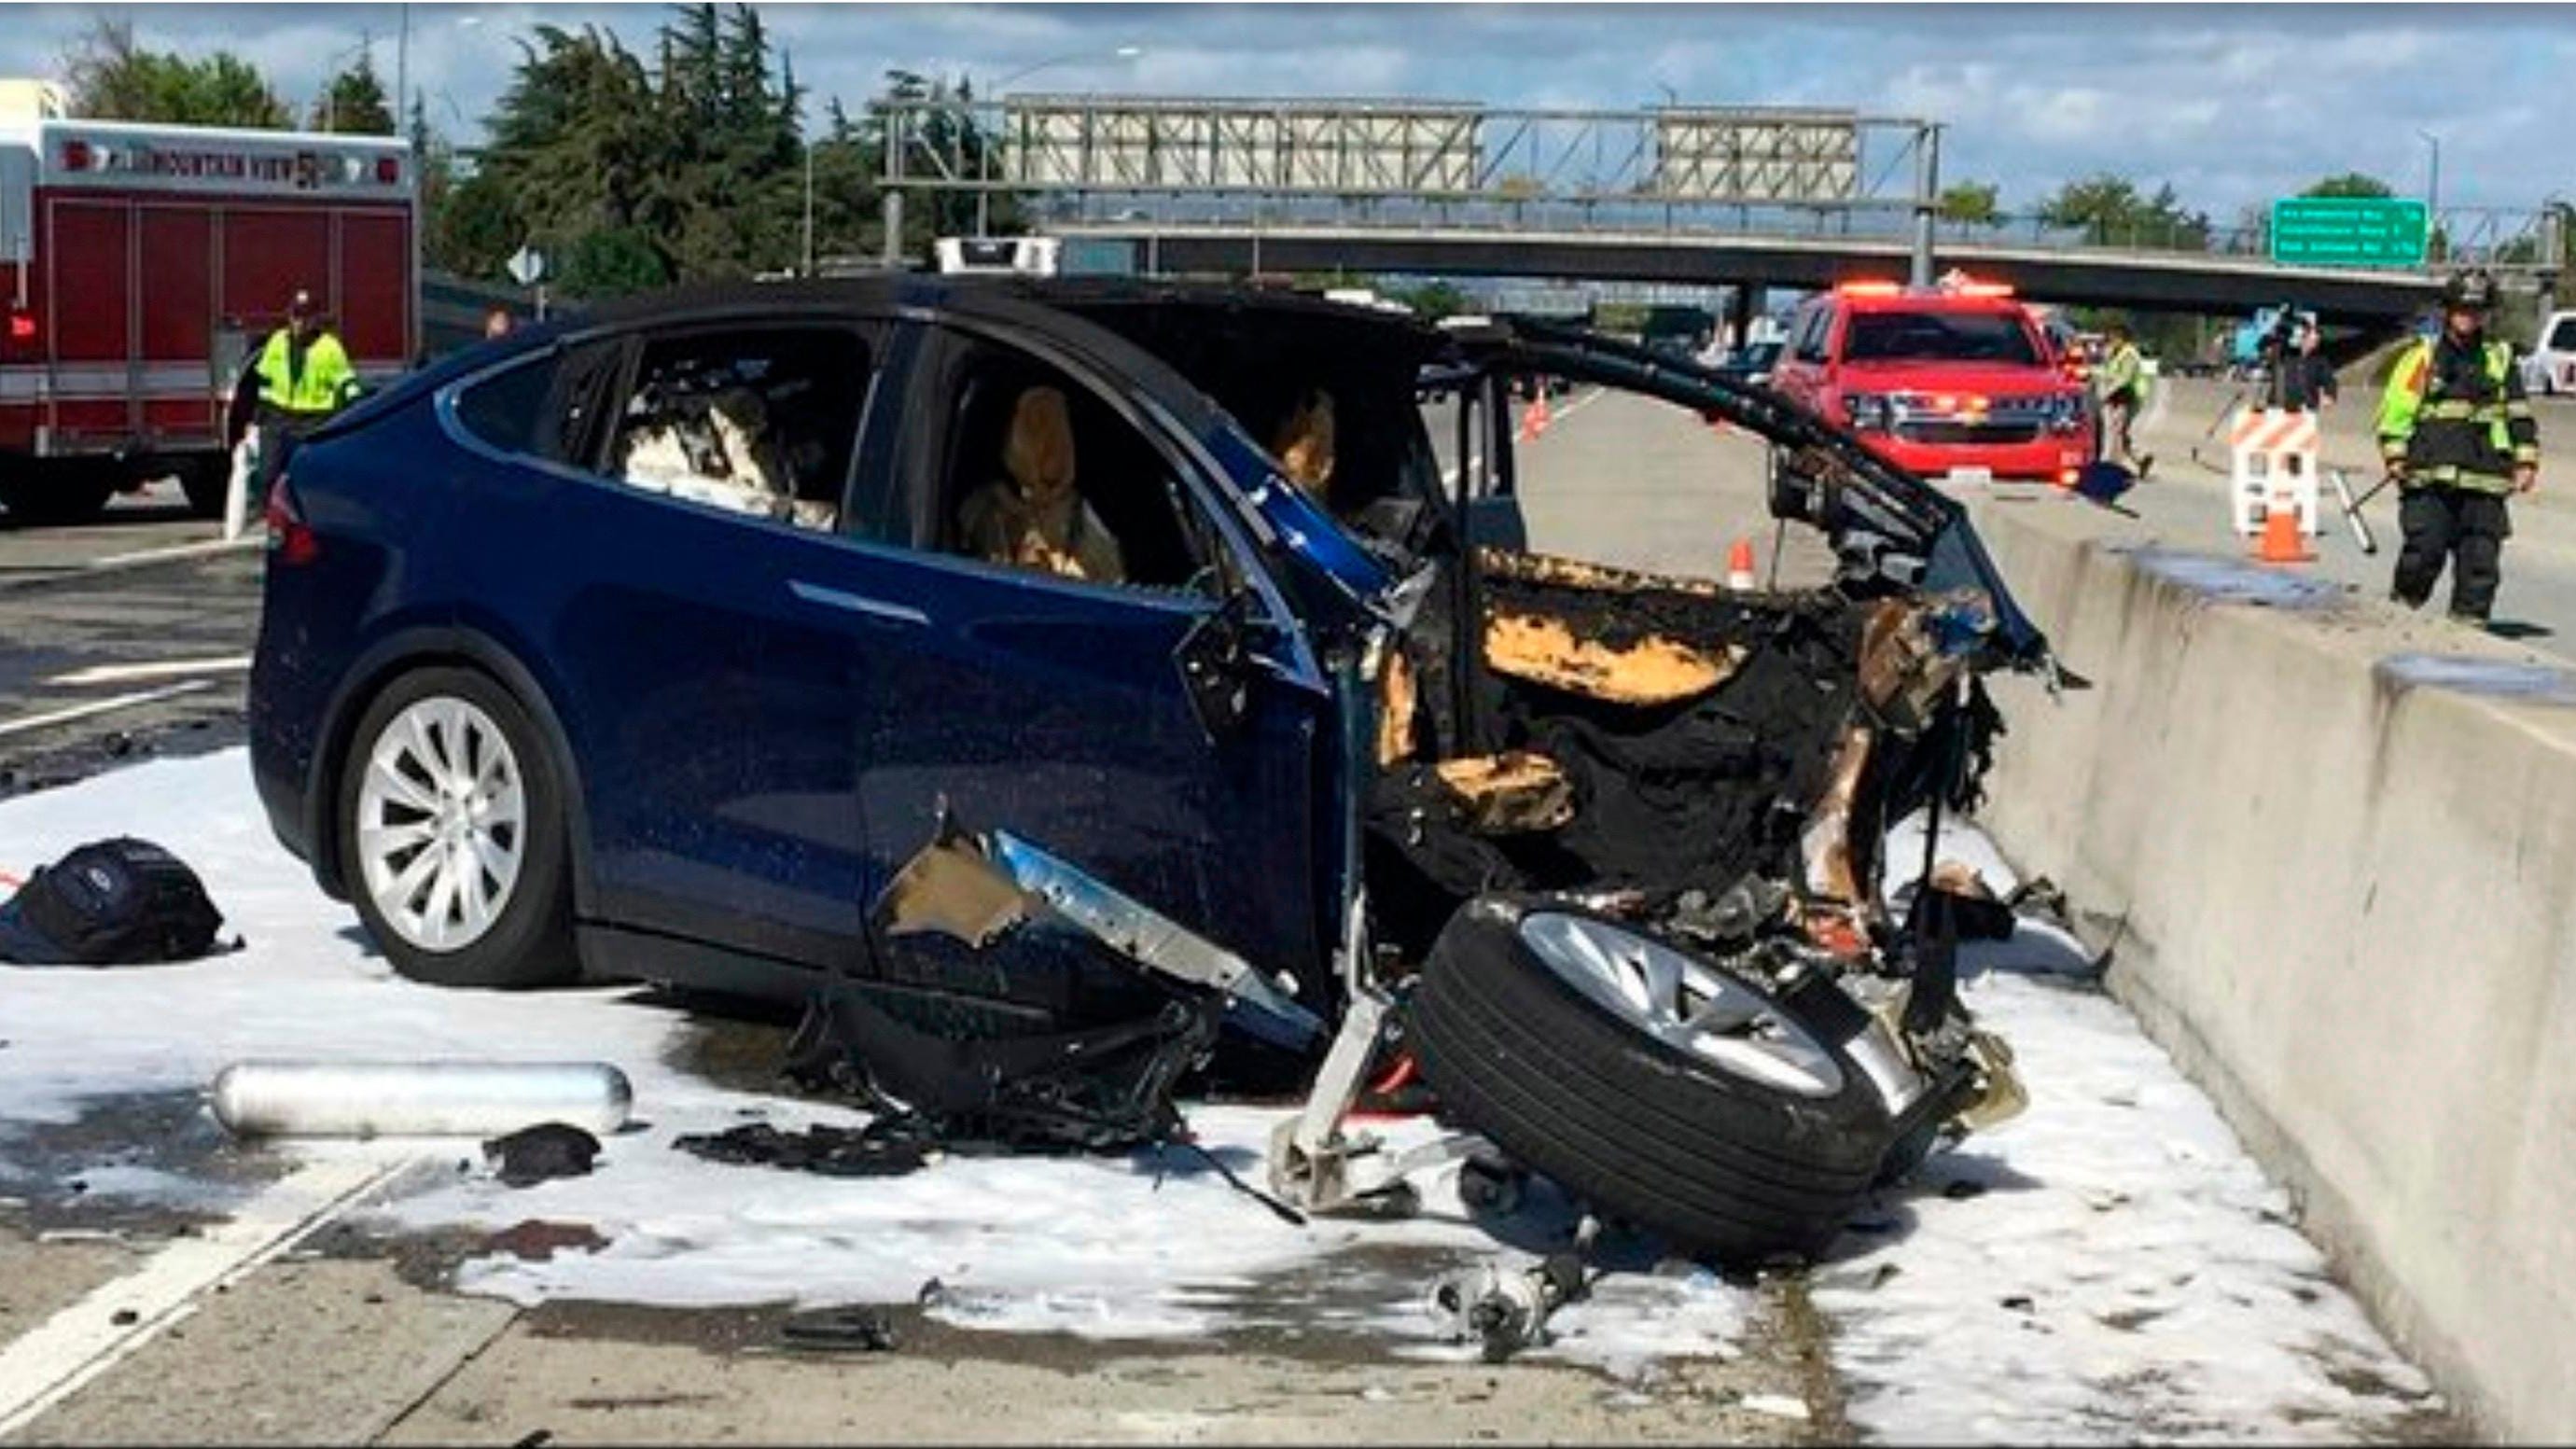 In this March 23, 2018, file photo provided by KTVU, emergency personnel work at the scene where a Tesla electric SUV crashed into a barrier on U.S. Highway 101 in Mountain View, Calif. Federal investigators say the Tesla using the company’s semi-autonomous driving system accelerated just before crashing into a California freeway barrier, killing its driver.